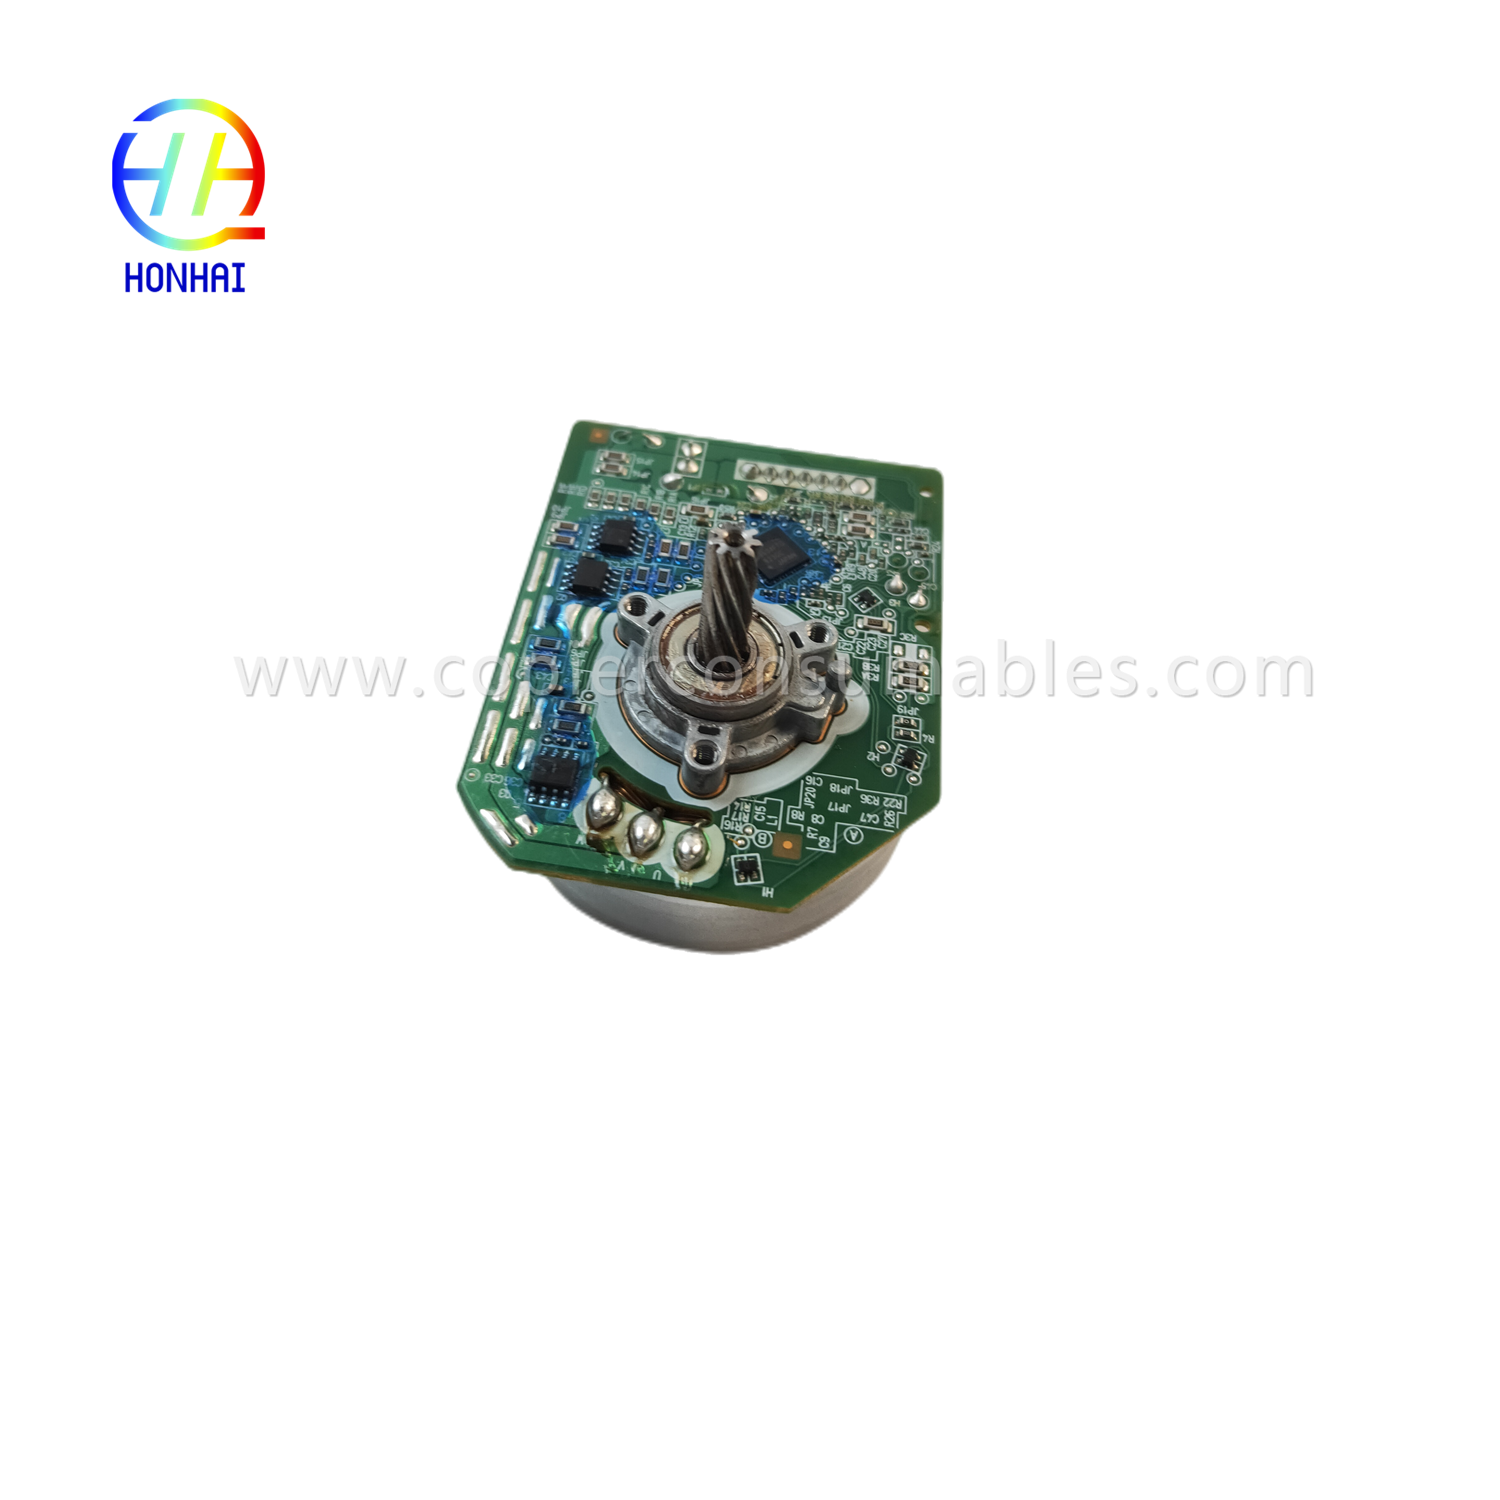 https://www.copierconsumables.com/motor-voor-kyocera-ecosys-serie-parts-nr-302lc44014-48m069f052-b-product/